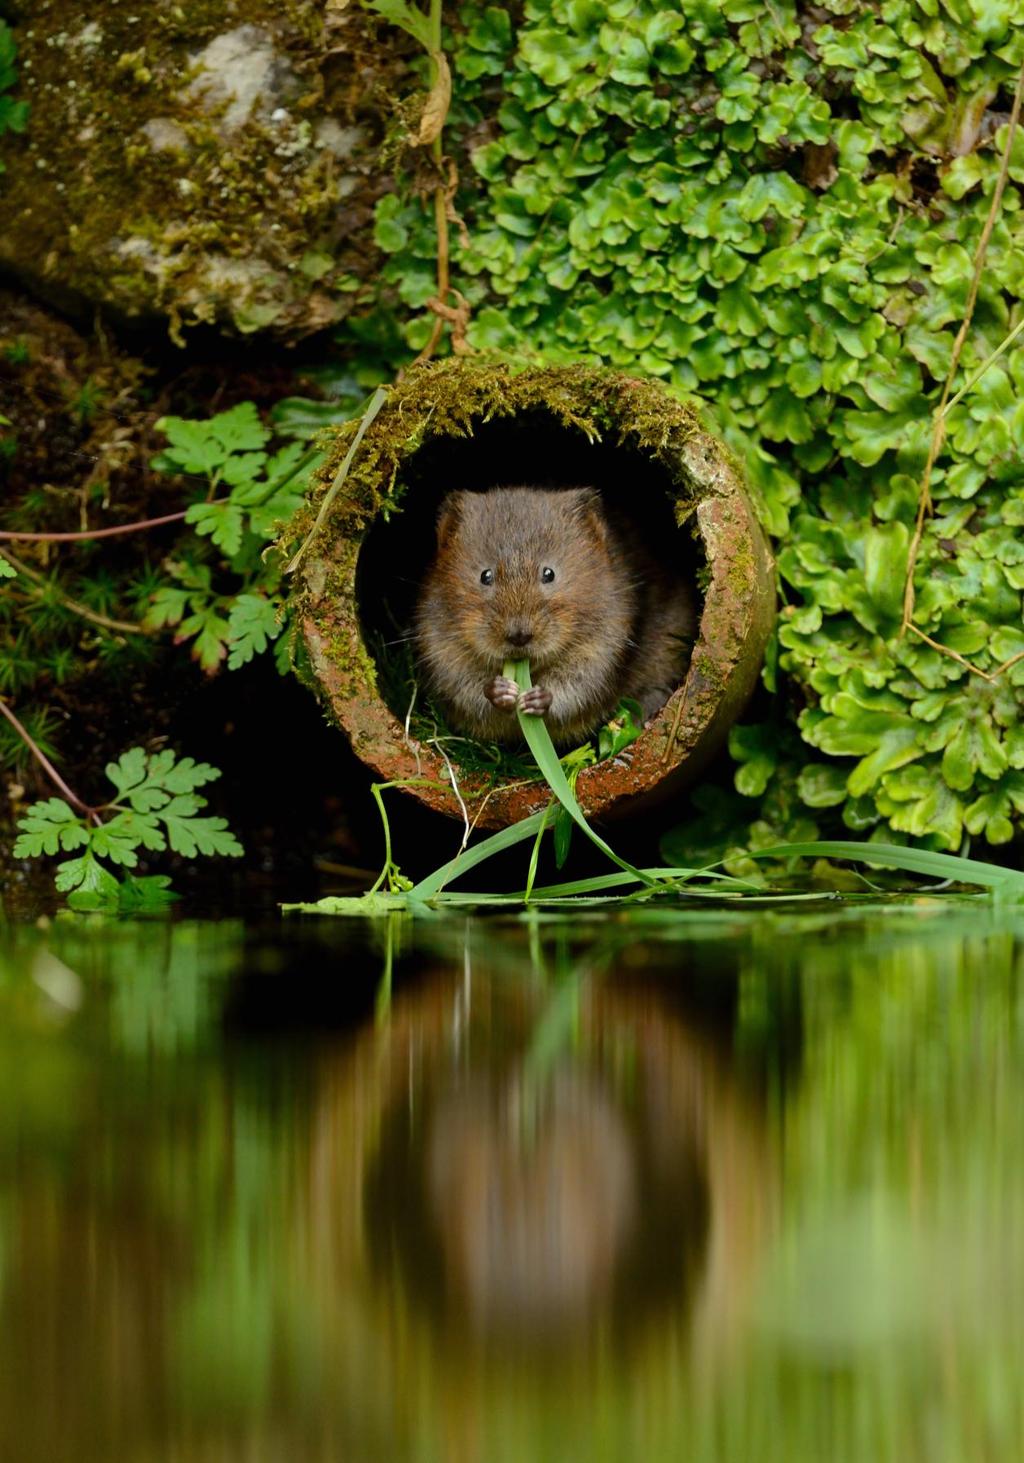 Water vole feeding: Ben Andrew We will achieve this by creating a Living Landscape and securing Living Seas.